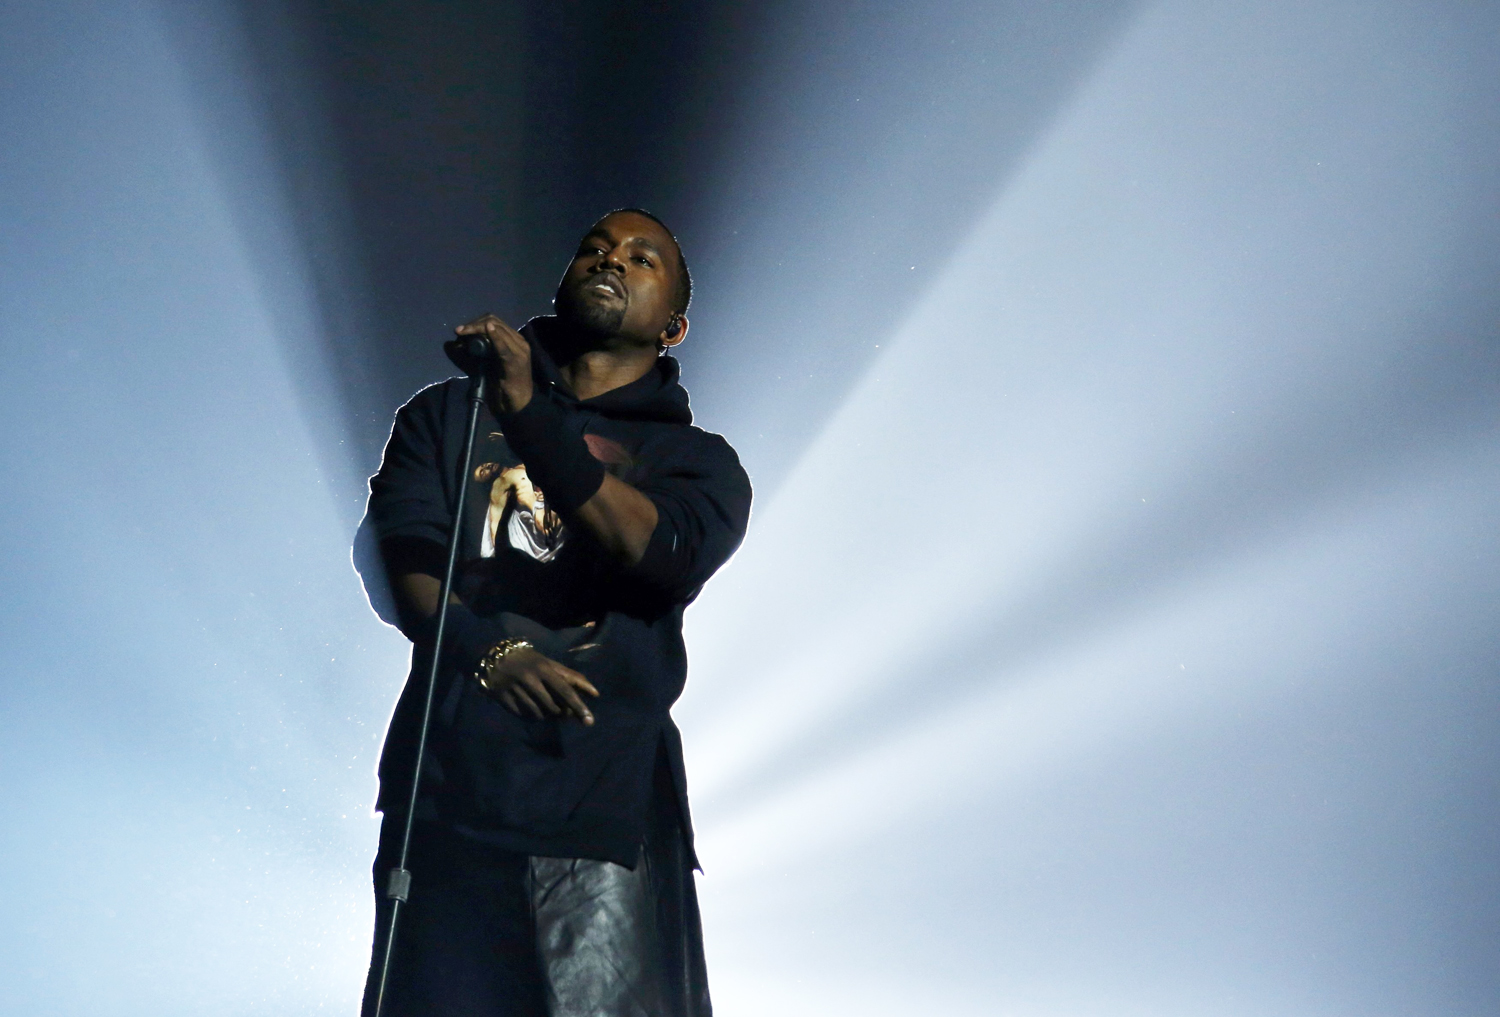 Kanye West performs during the "12-12-12" benefit concert for victims of Superstorm Sandy at Madison Square Garden in New York